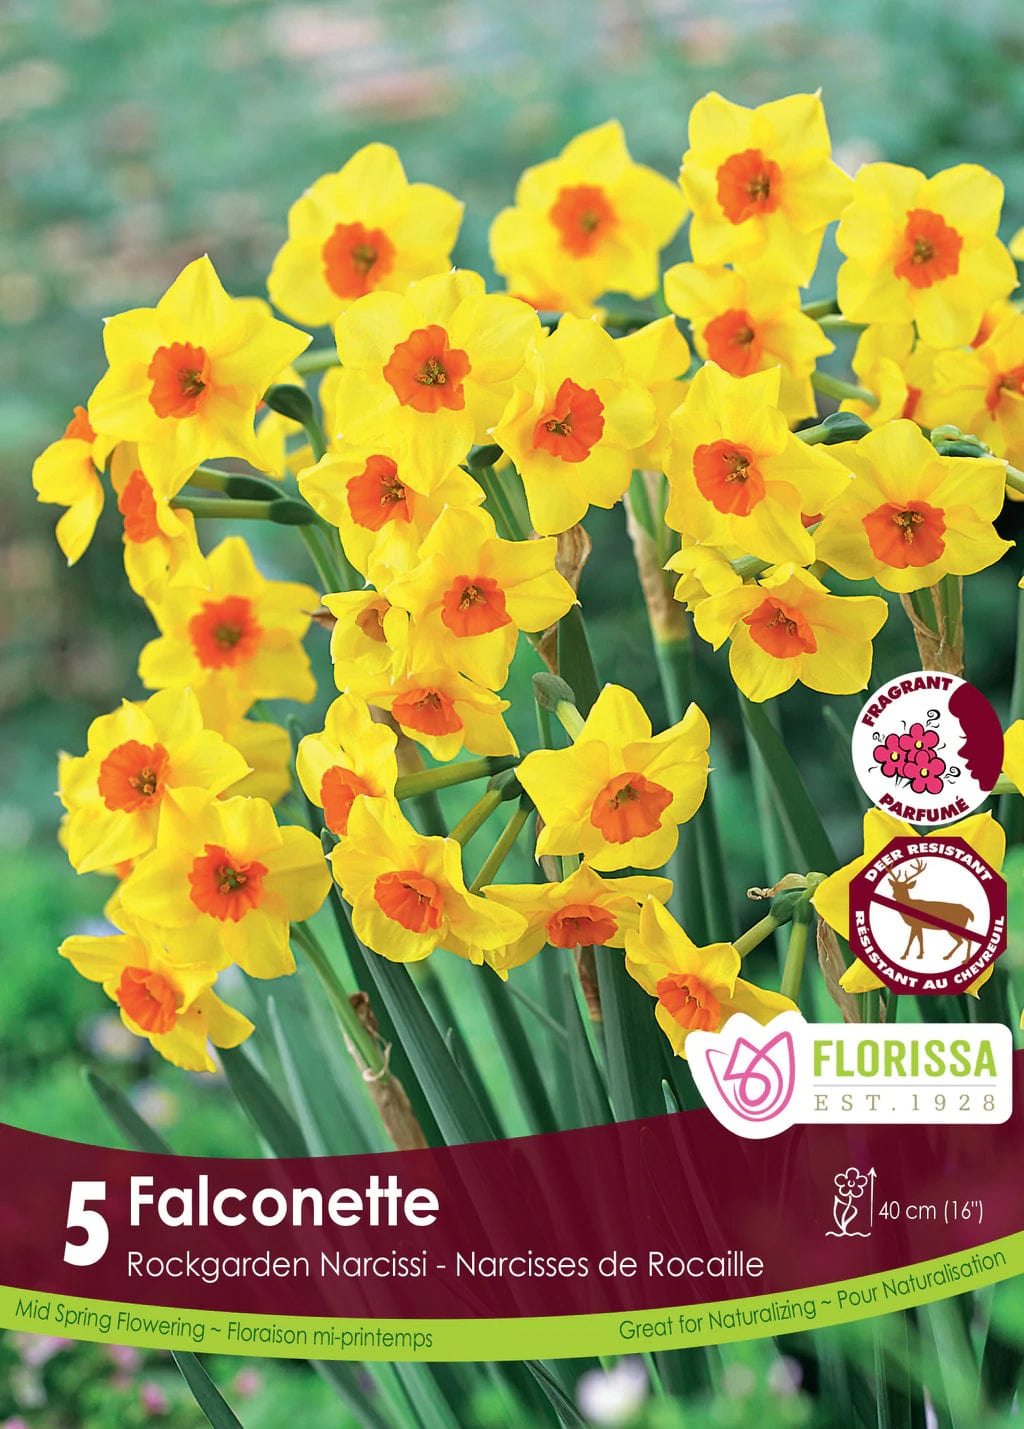 Narcissus - Falconette, 5 Pack